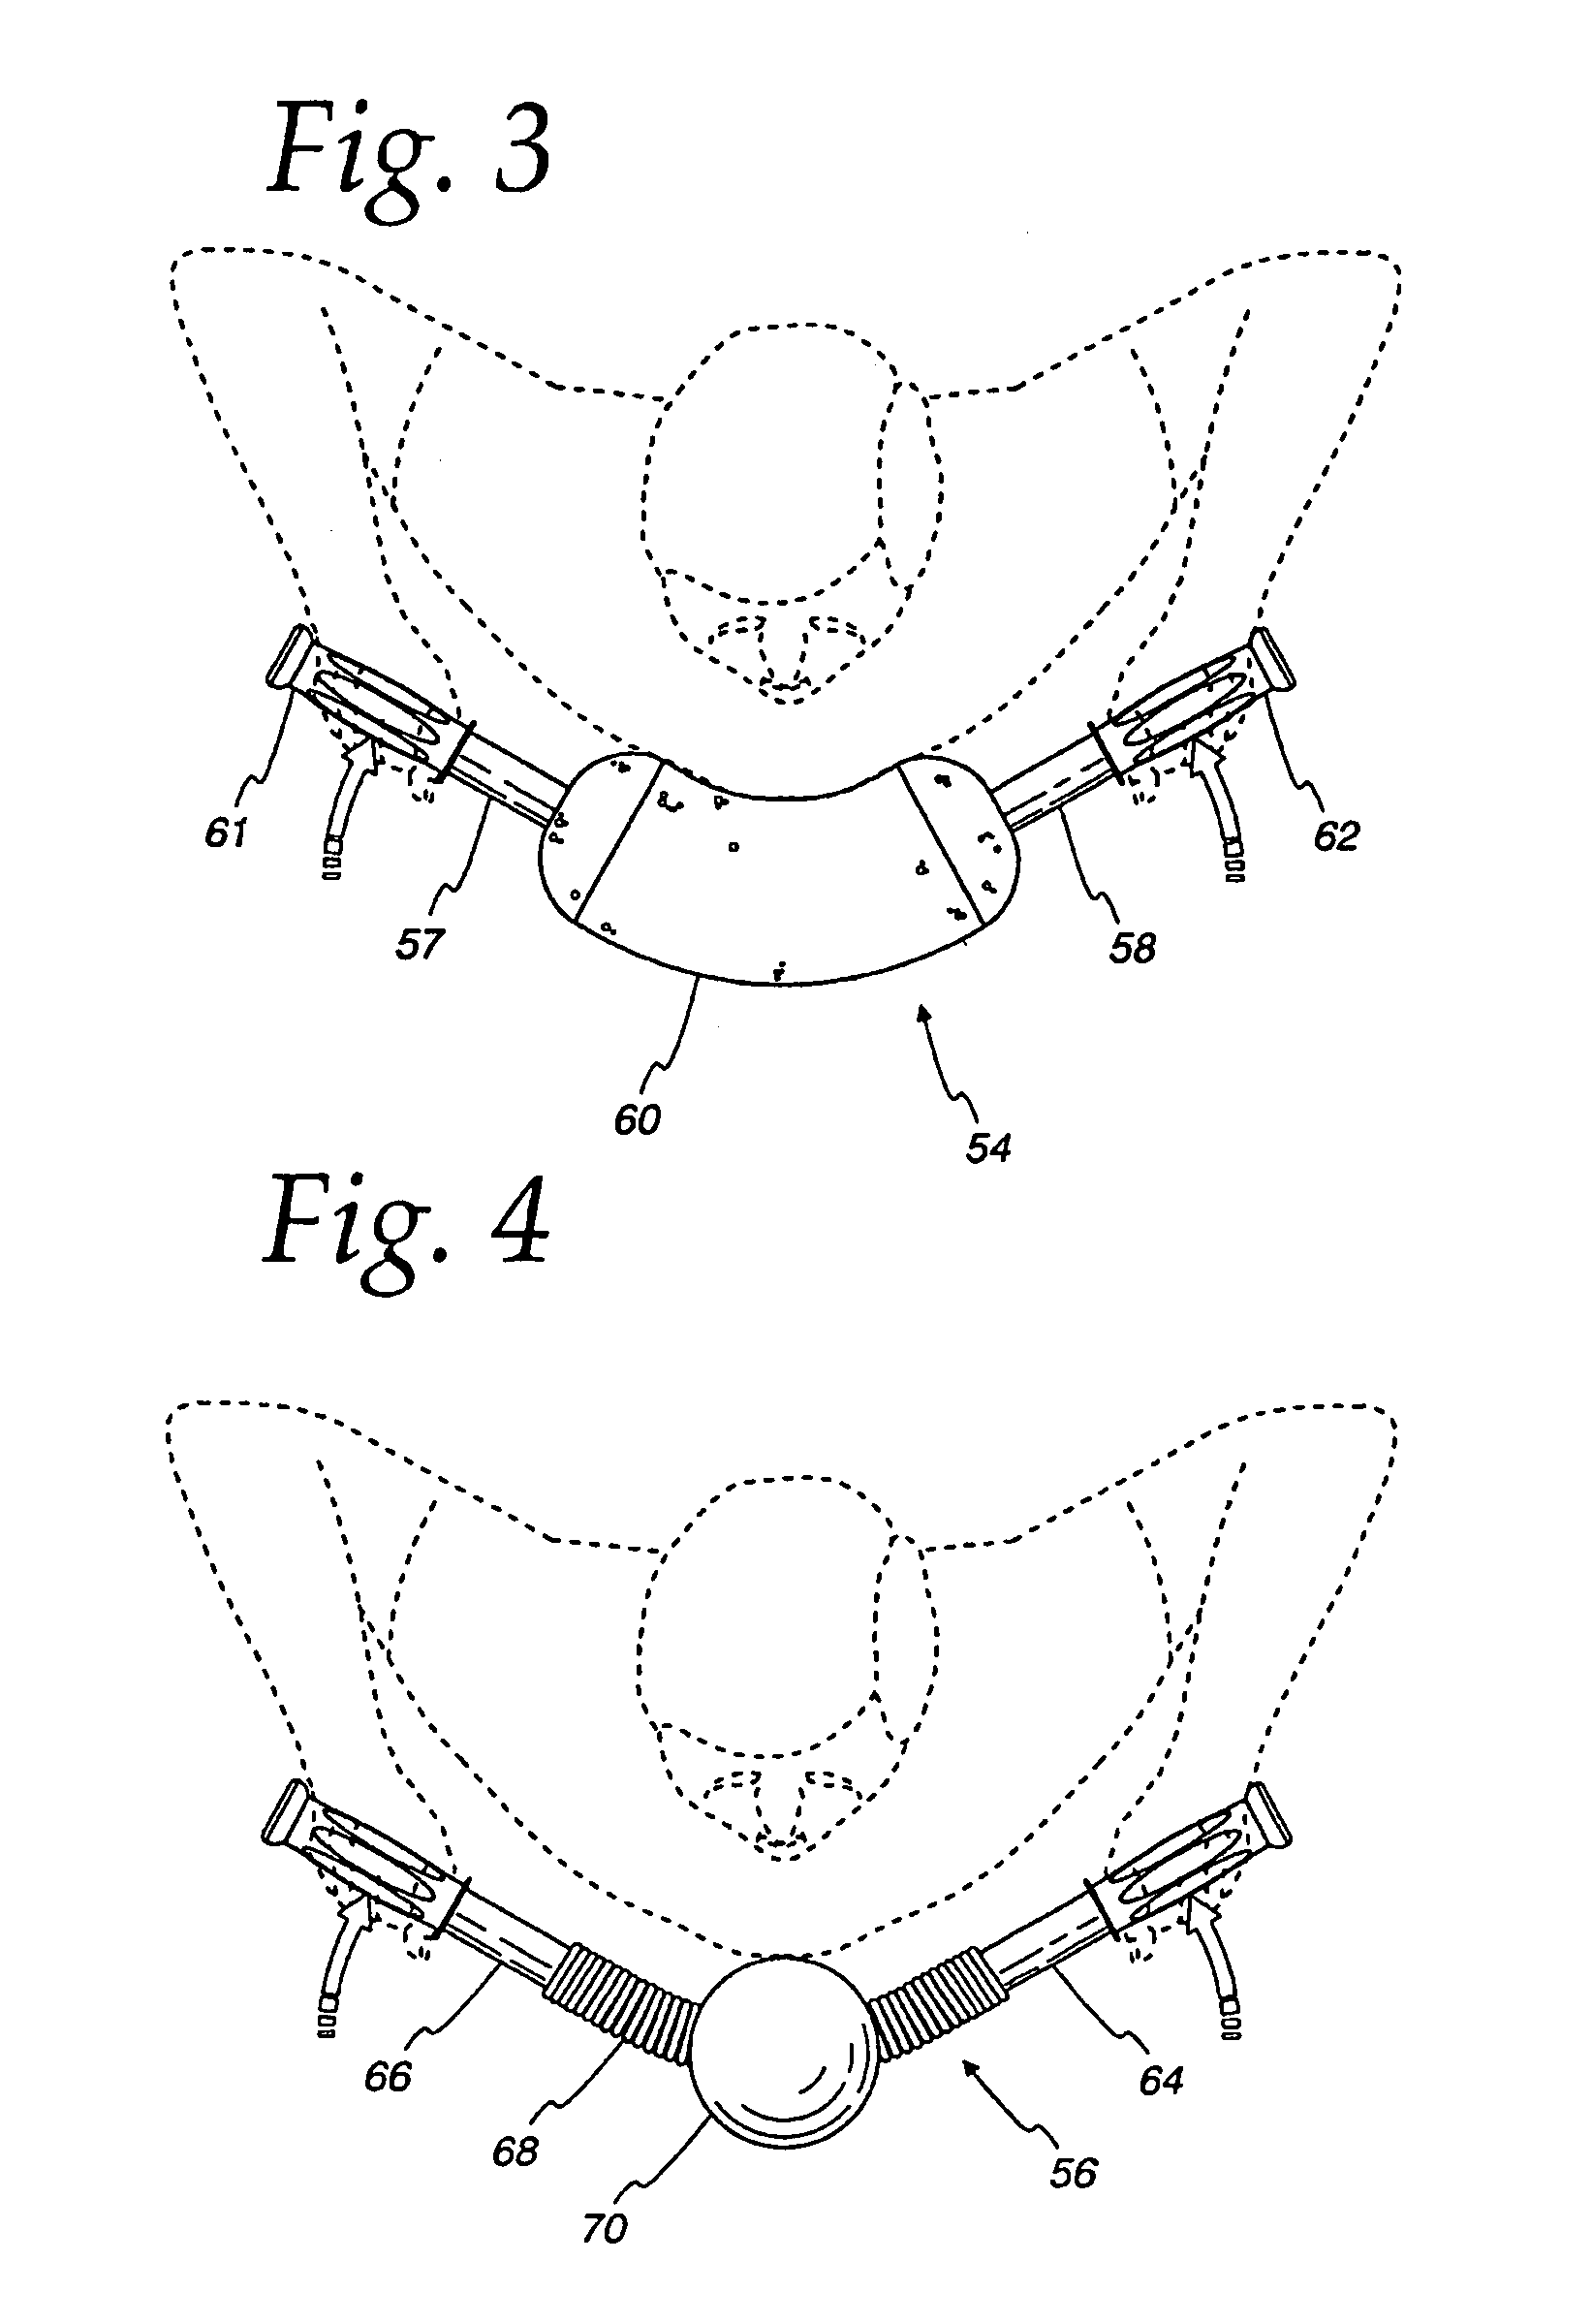 Exercise device and methods